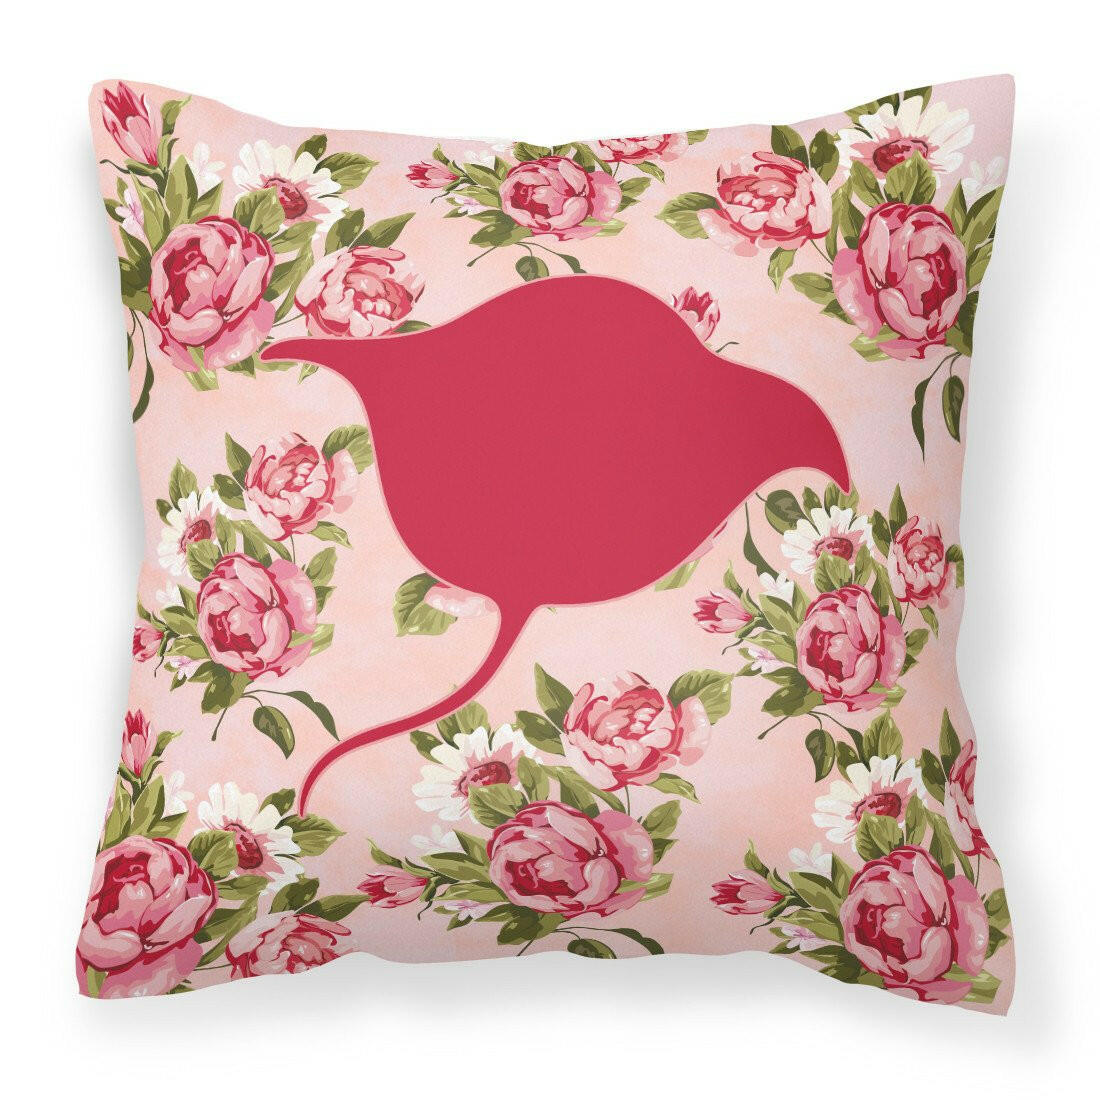 Stingray Shabby Chic Pink Roses  Fabric Decorative Pillow BB1094-RS-PK-PW1414 - the-store.com